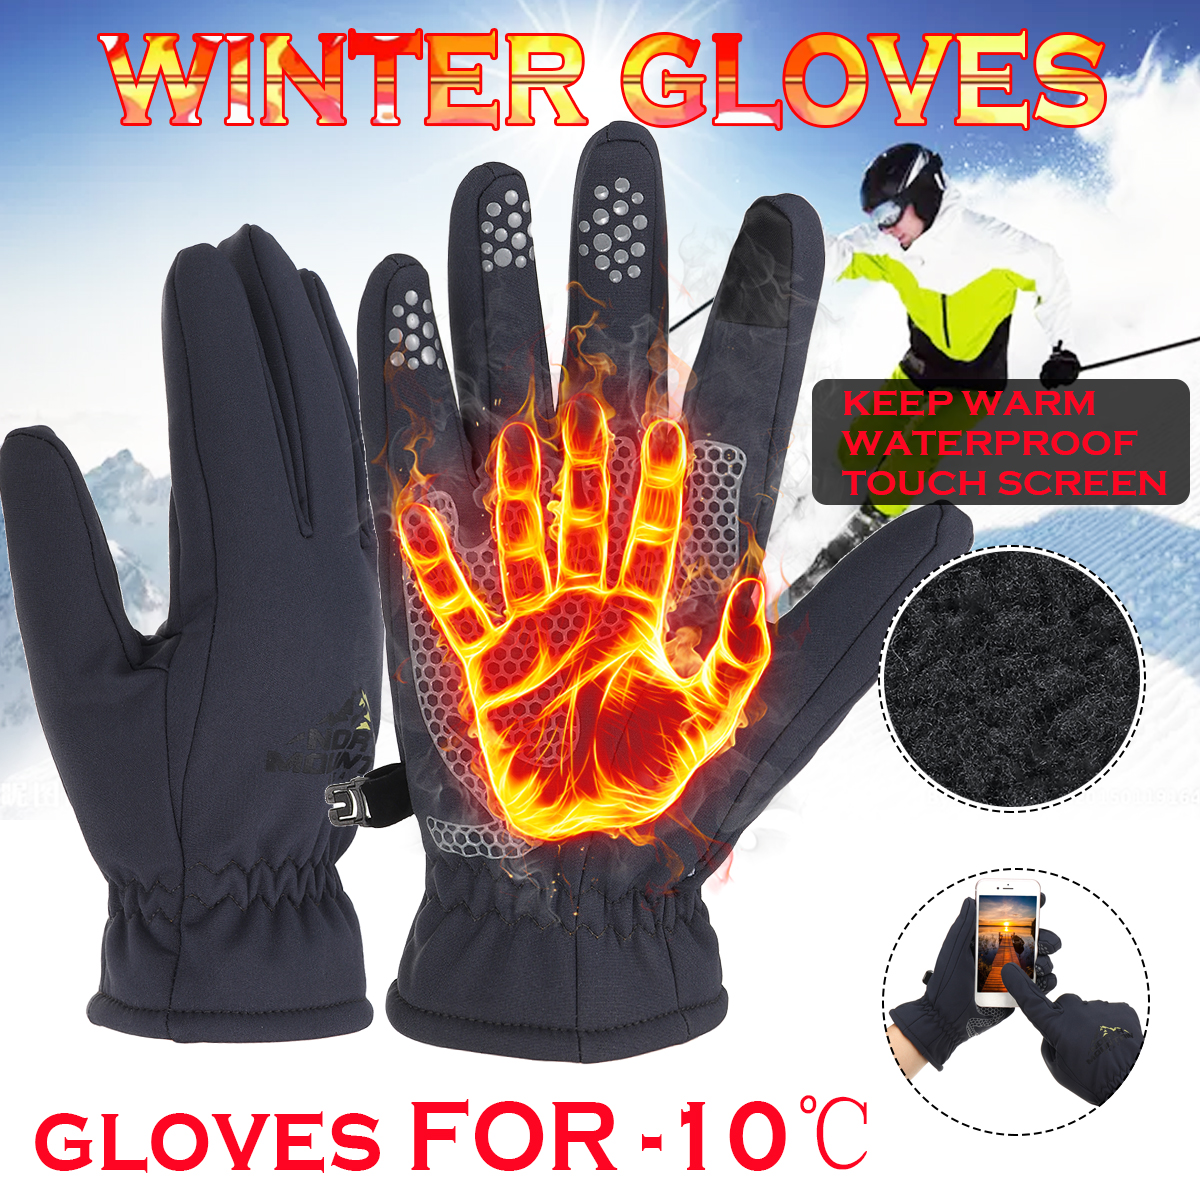 1Pair-899-Outdoor-Non-slip-Windproof-Warm-Thermal-Gloves-Ski-Snow-Cycling-Waterproof-Winter-Glove-1629275-1